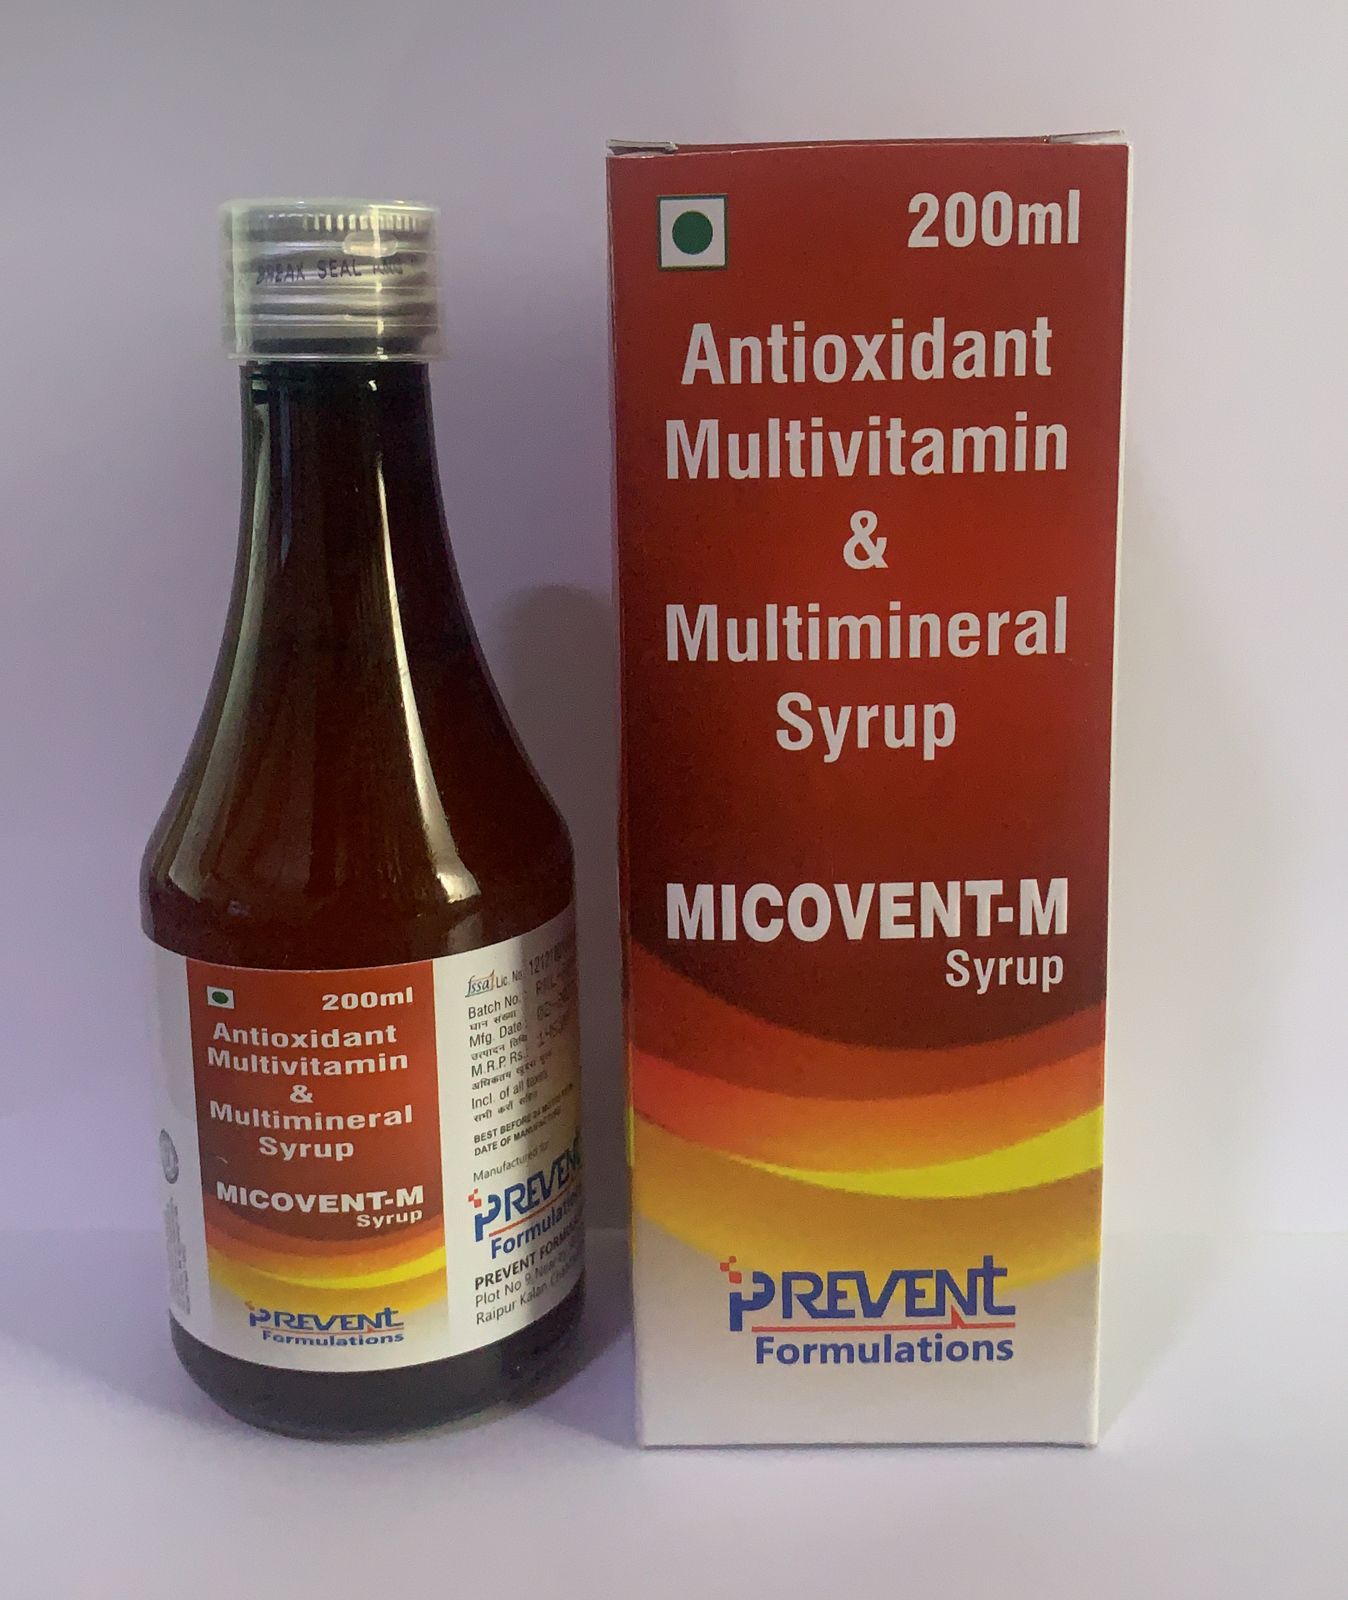 MICOVENT-M SYRUP